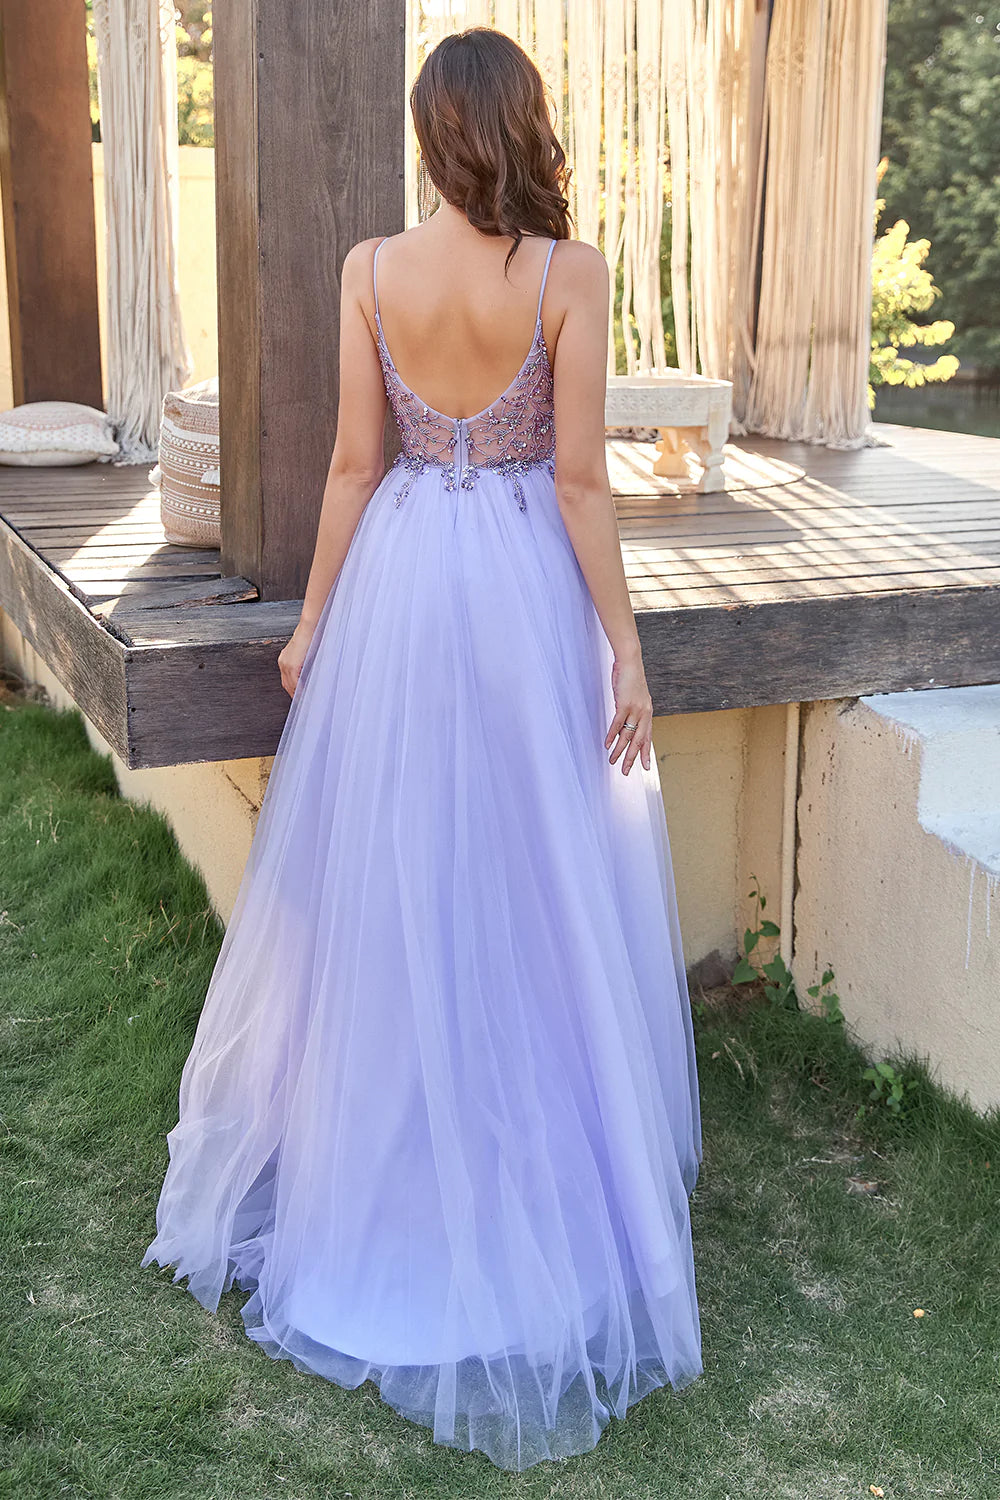 Purple Tulle A Line Purple Prom Dresses 2022 With 3D Flower Print,  Spaghetti Straps, Corset Back, And Sweep Train Perfect For Formal Parties,  Second Reception, Evening Events, Or Special Occasions Plus Size